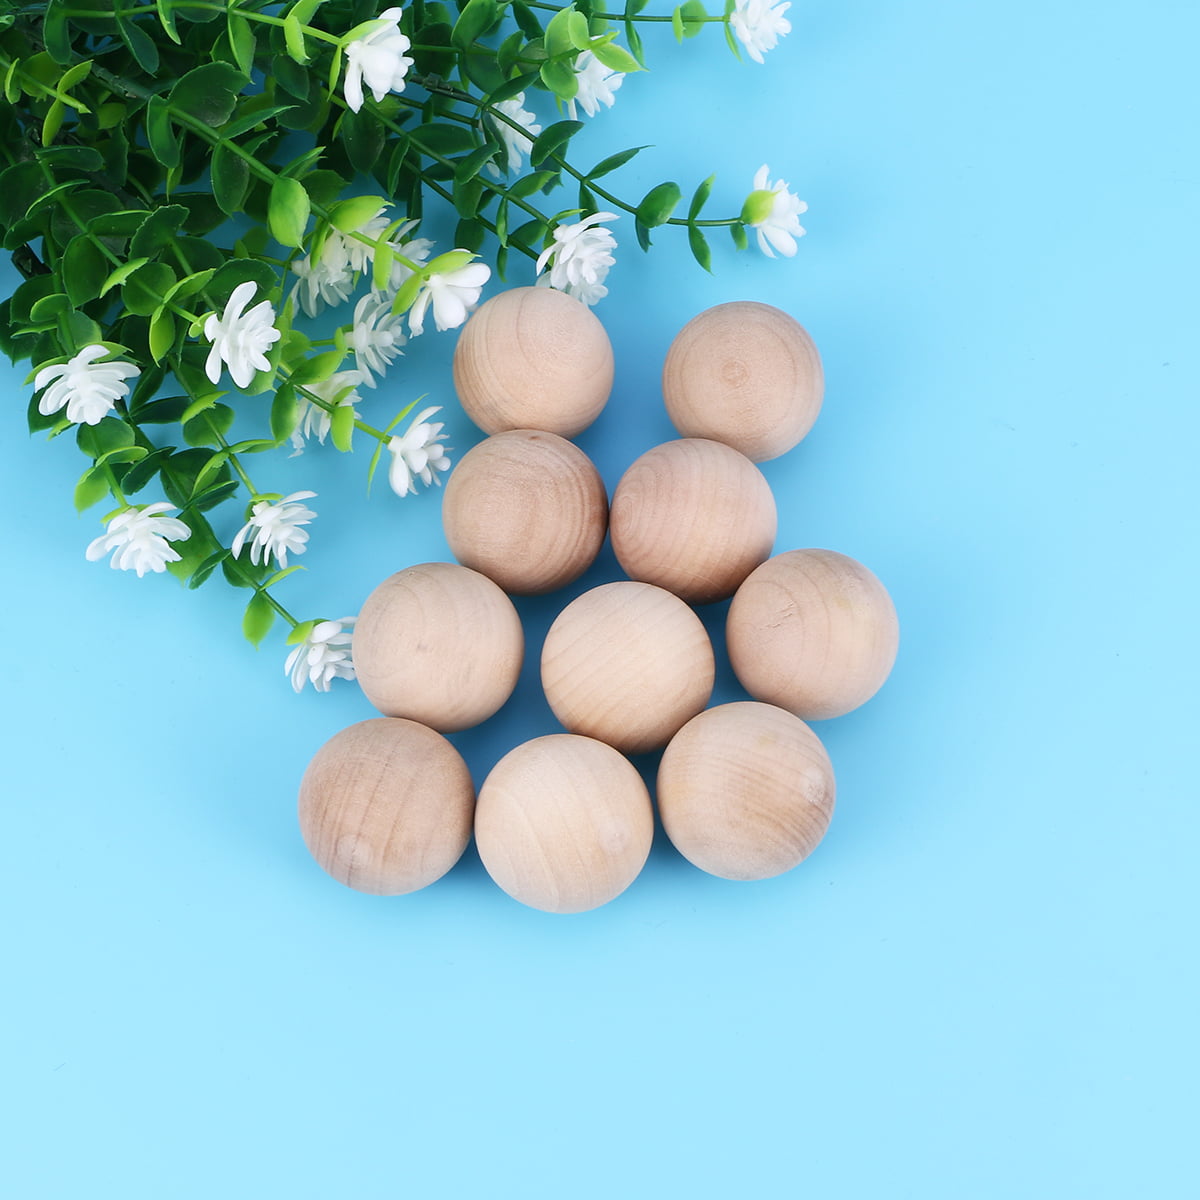 6 Pieces Wooden Balls for Crafts, Mini Round Wooden Balls for DIY Projects and Craft Supplies, 35 mm Diameter